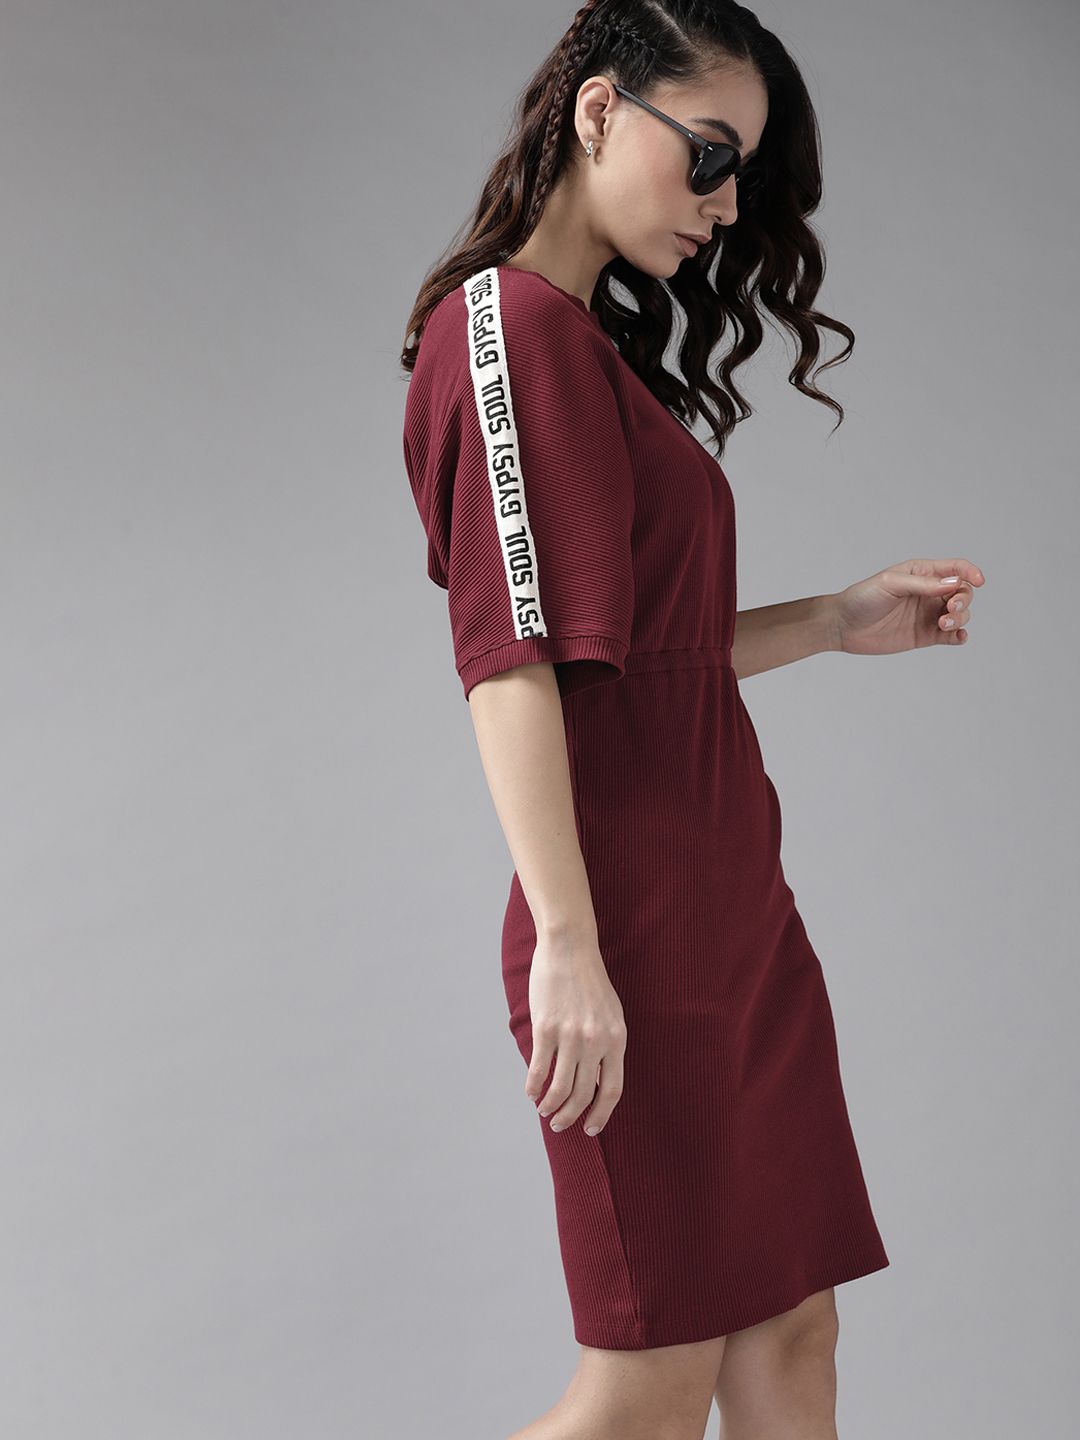 Roadster Maroon Solid Ribbed Sheath Dress with Cut Out Detail Price in India